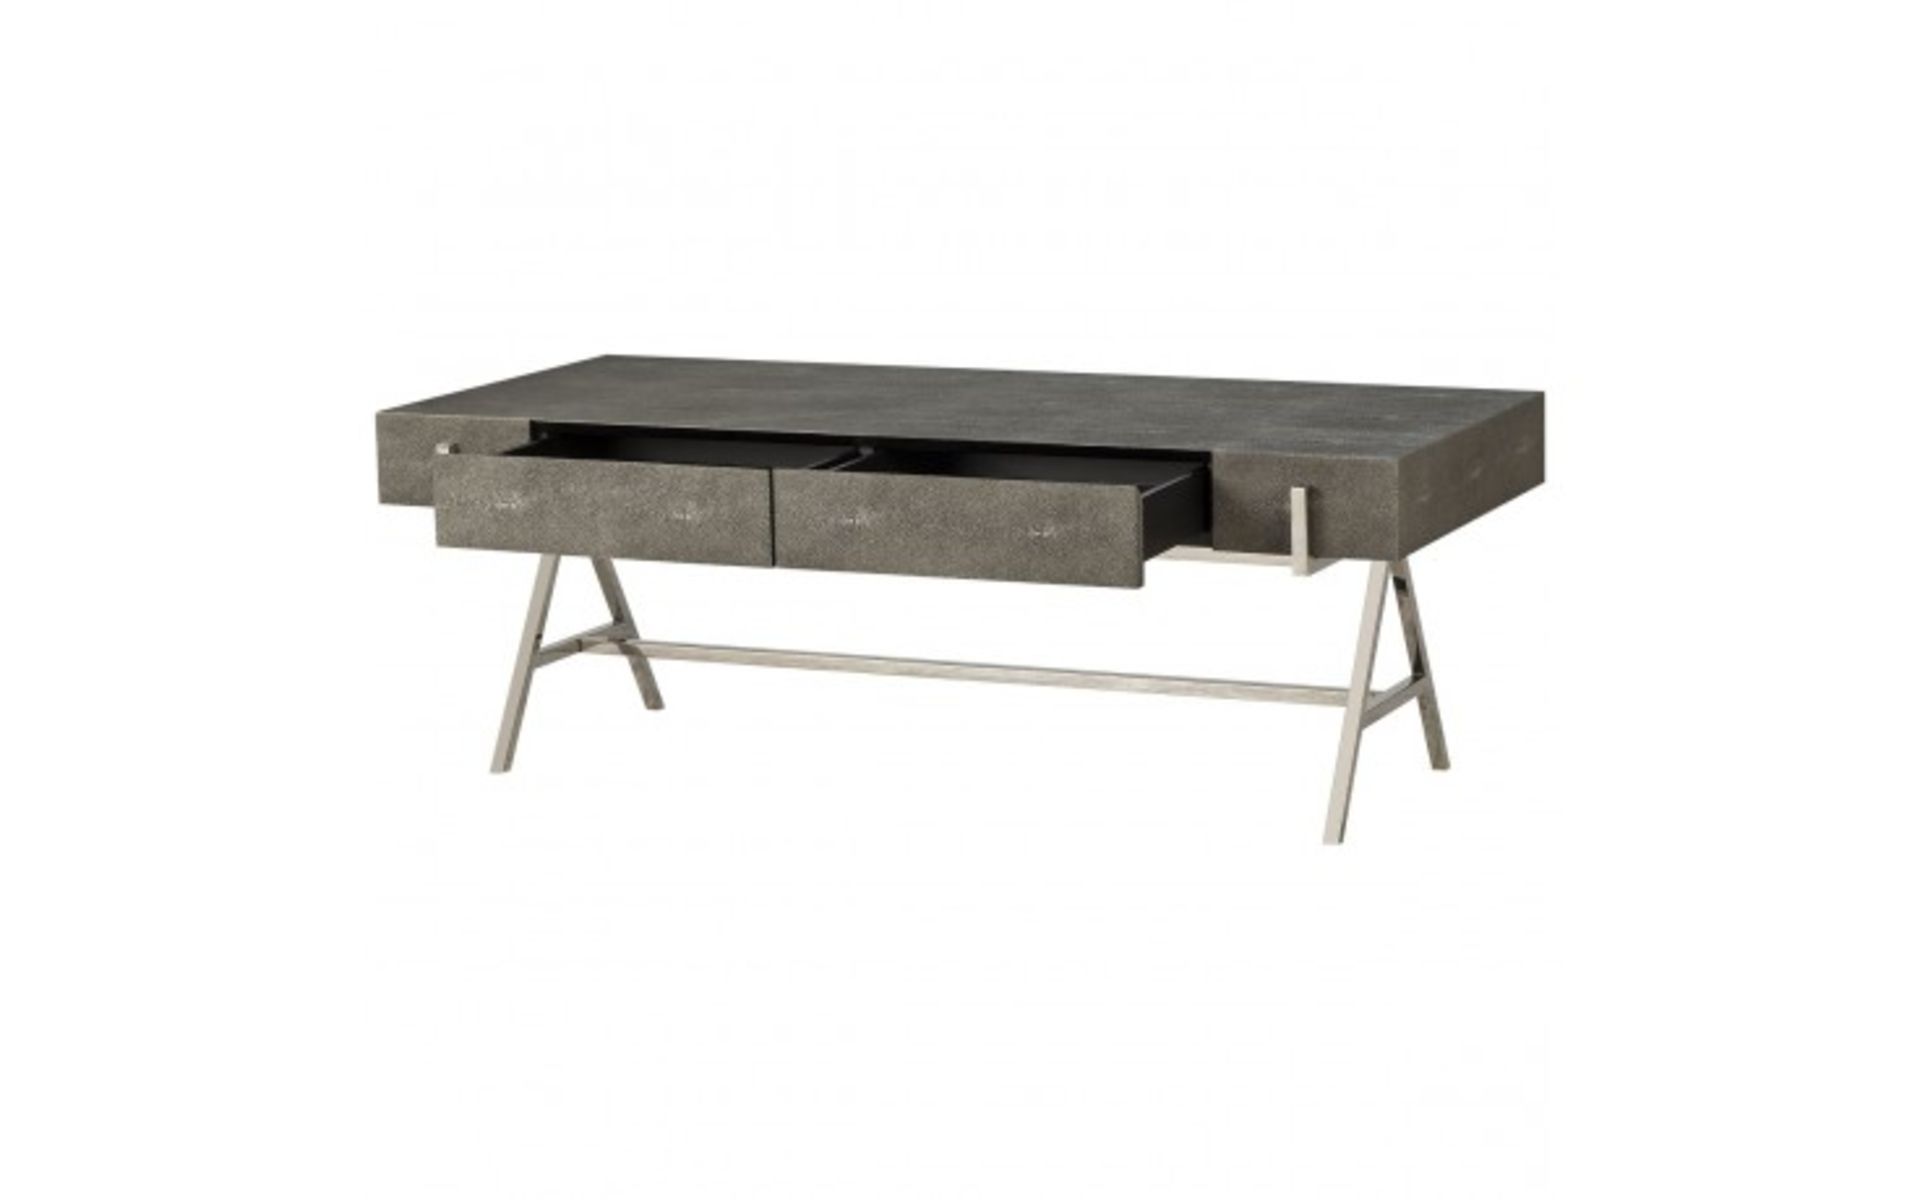 Coffee table- charcoal shagreen Constructed From Stainless Steel, Poplar Wood, Okoume Veneers And - Image 2 of 2